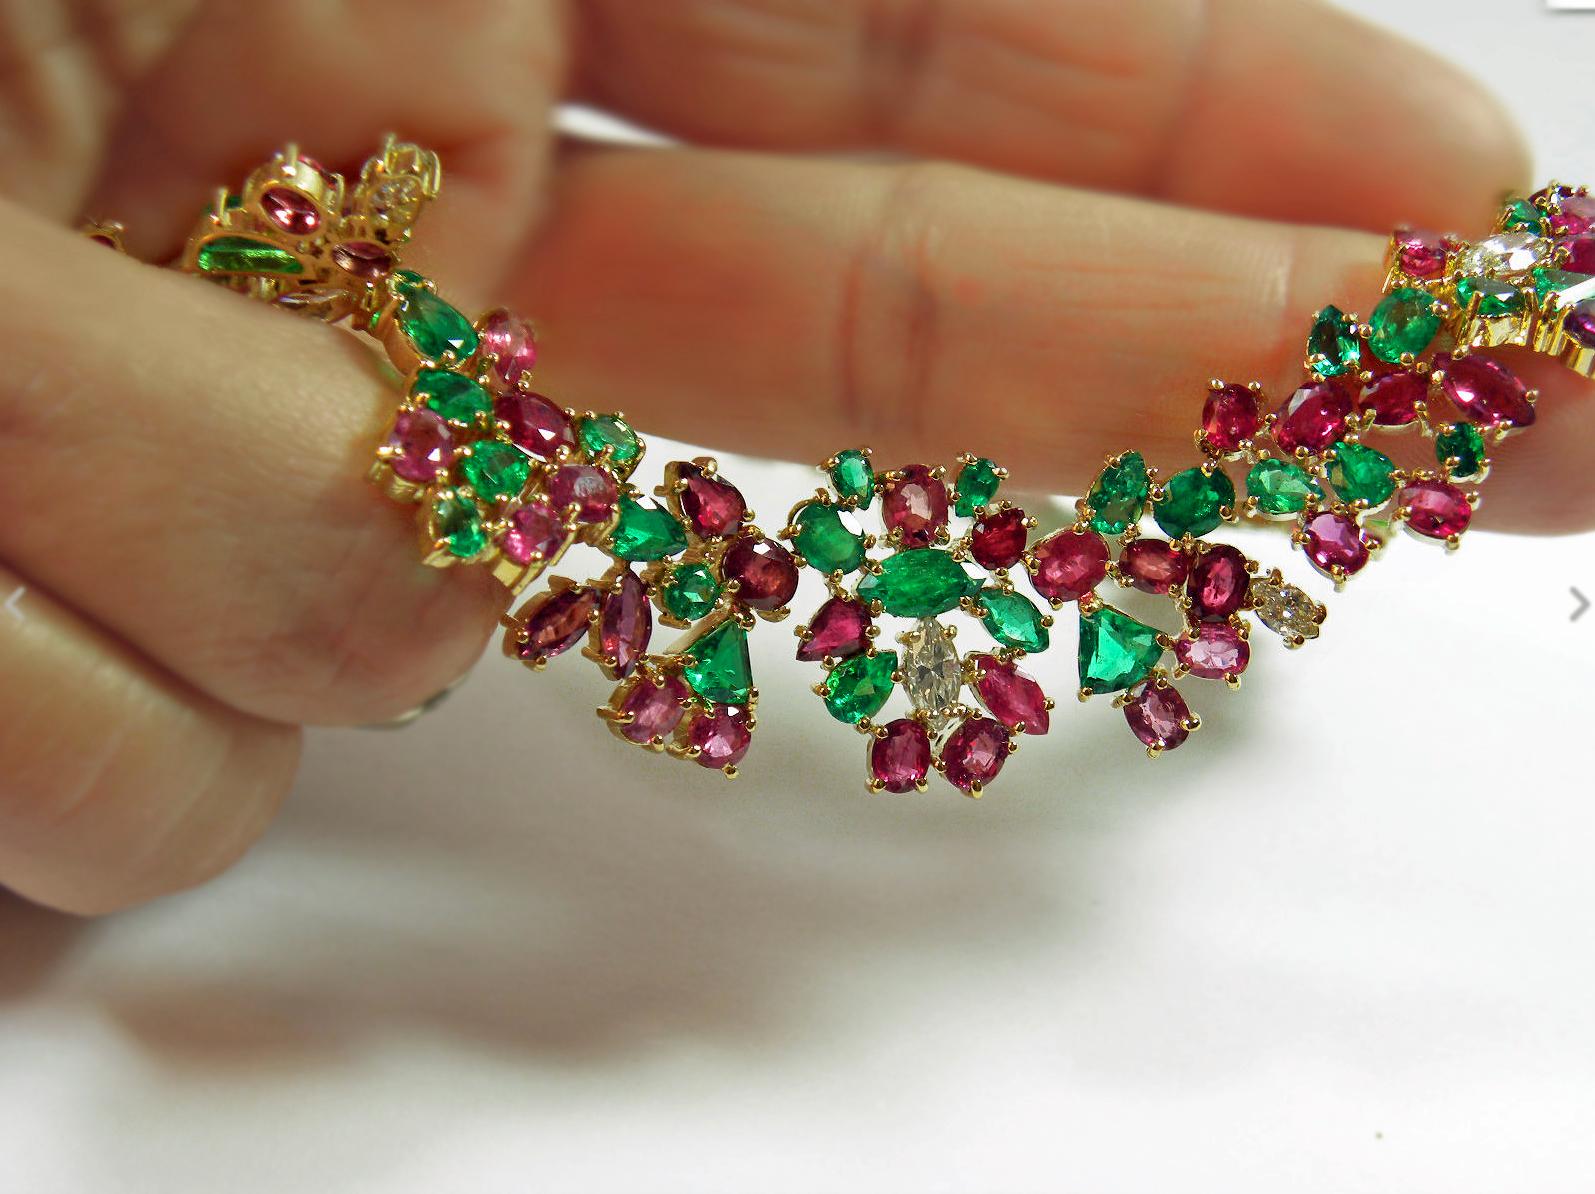 A guaranteed statement piece , this exquisite Emerald Ruby Diamond 18K Gold Tutti Frutti Garden One of a Kind Necklace
Primary Stones: 100% Natural Ruby
Shape or Cut Rubies: Mix-Cut 
Average Color/Clarity Ruby: Red to raspberry/VS
Total Ruby Weight: